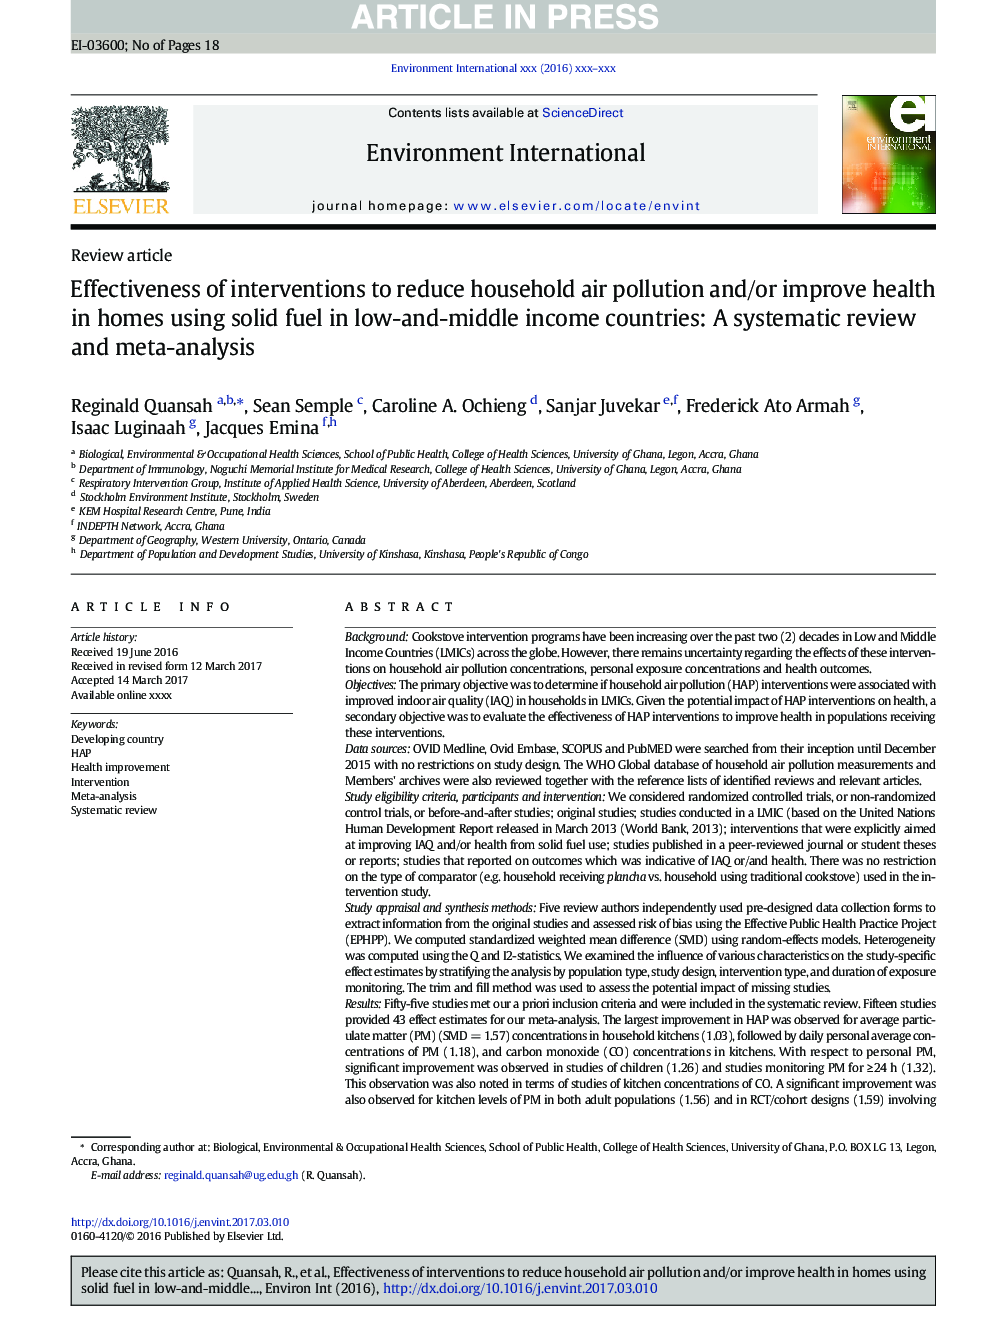 Effectiveness of interventions to reduce household air pollution and/or improve health in homes using solid fuel in low-and-middle income countries: A systematic review and meta-analysis